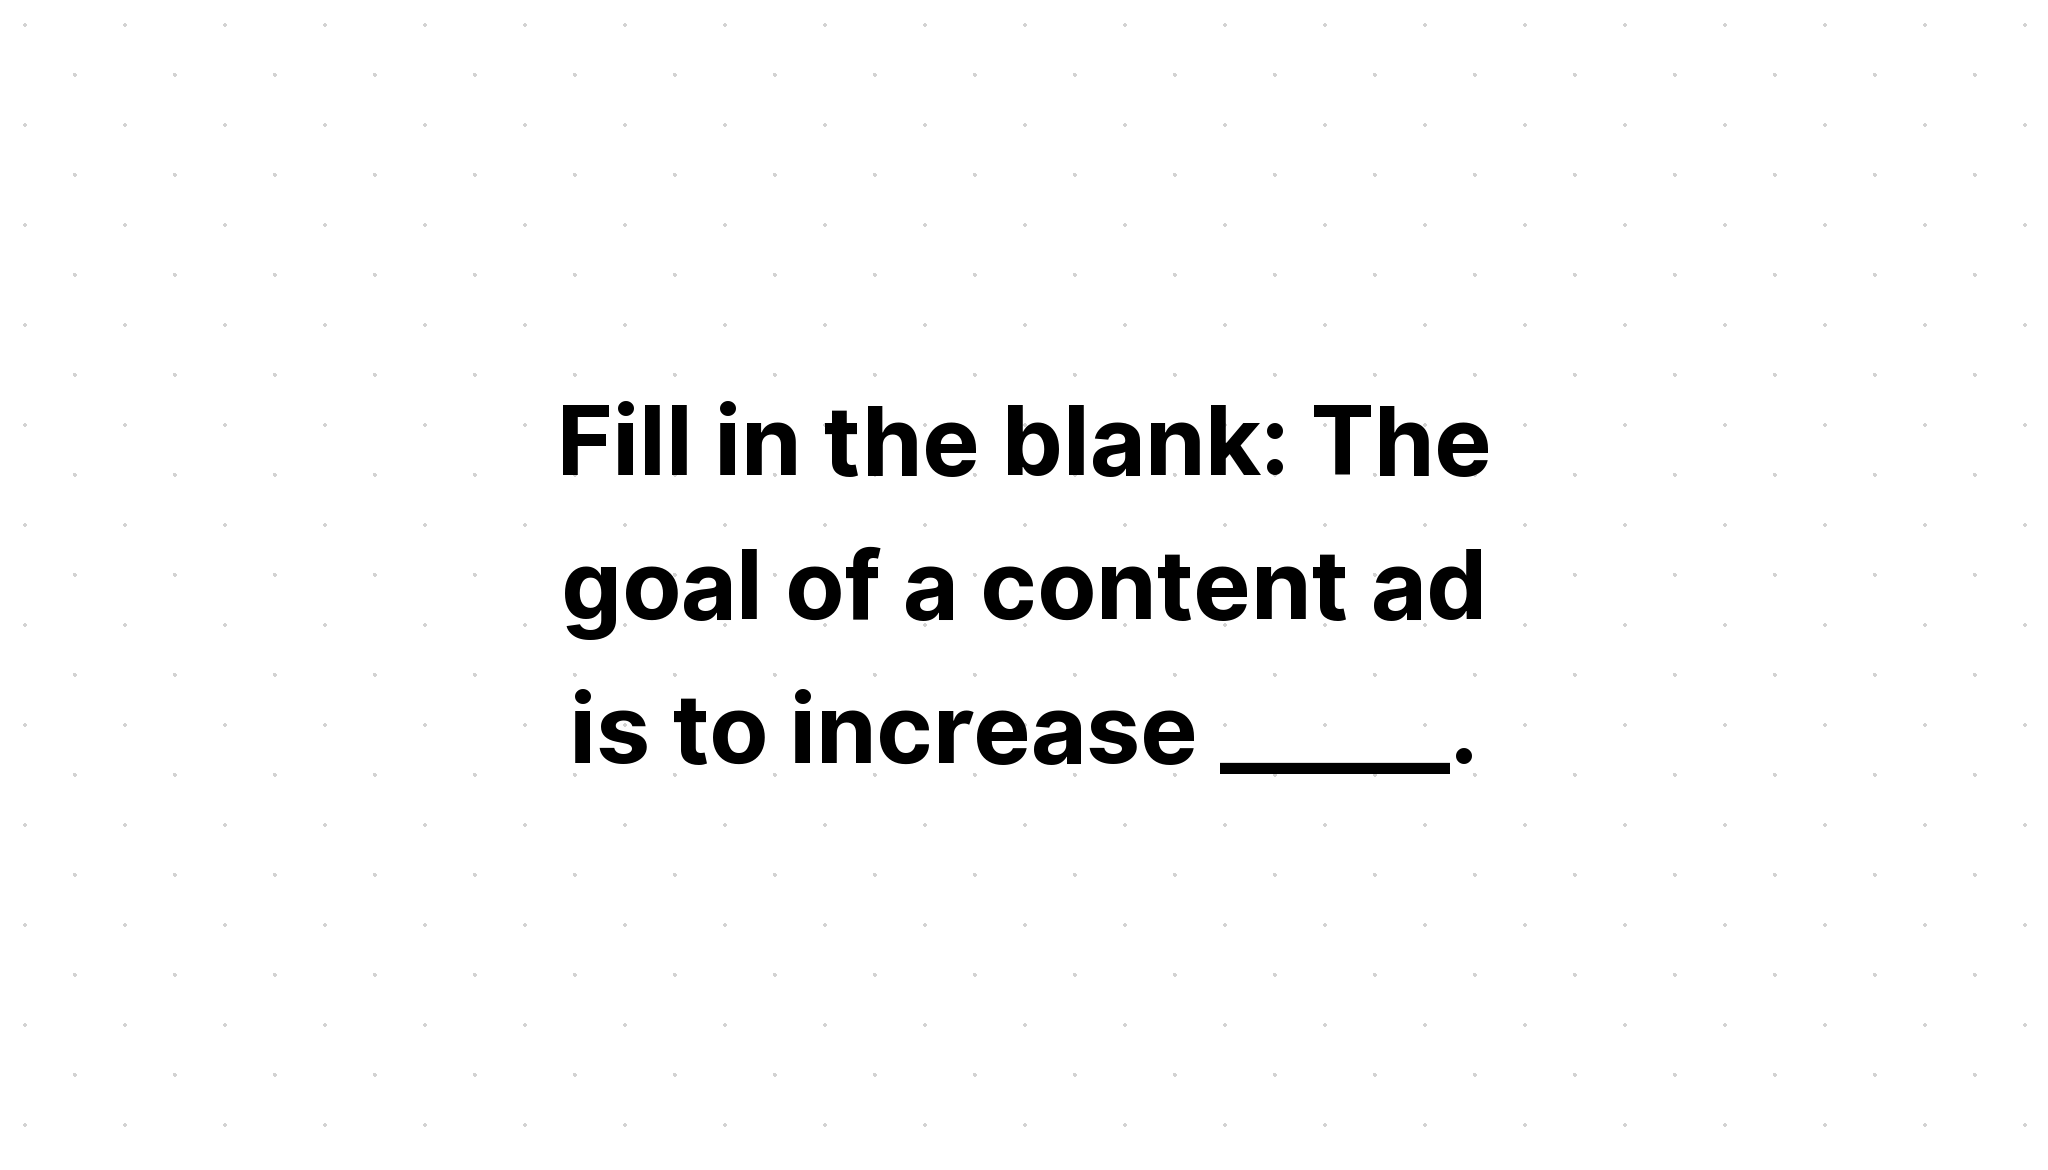 fill-in-the-blank-the-goal-of-a-content-ad-is-to-increase